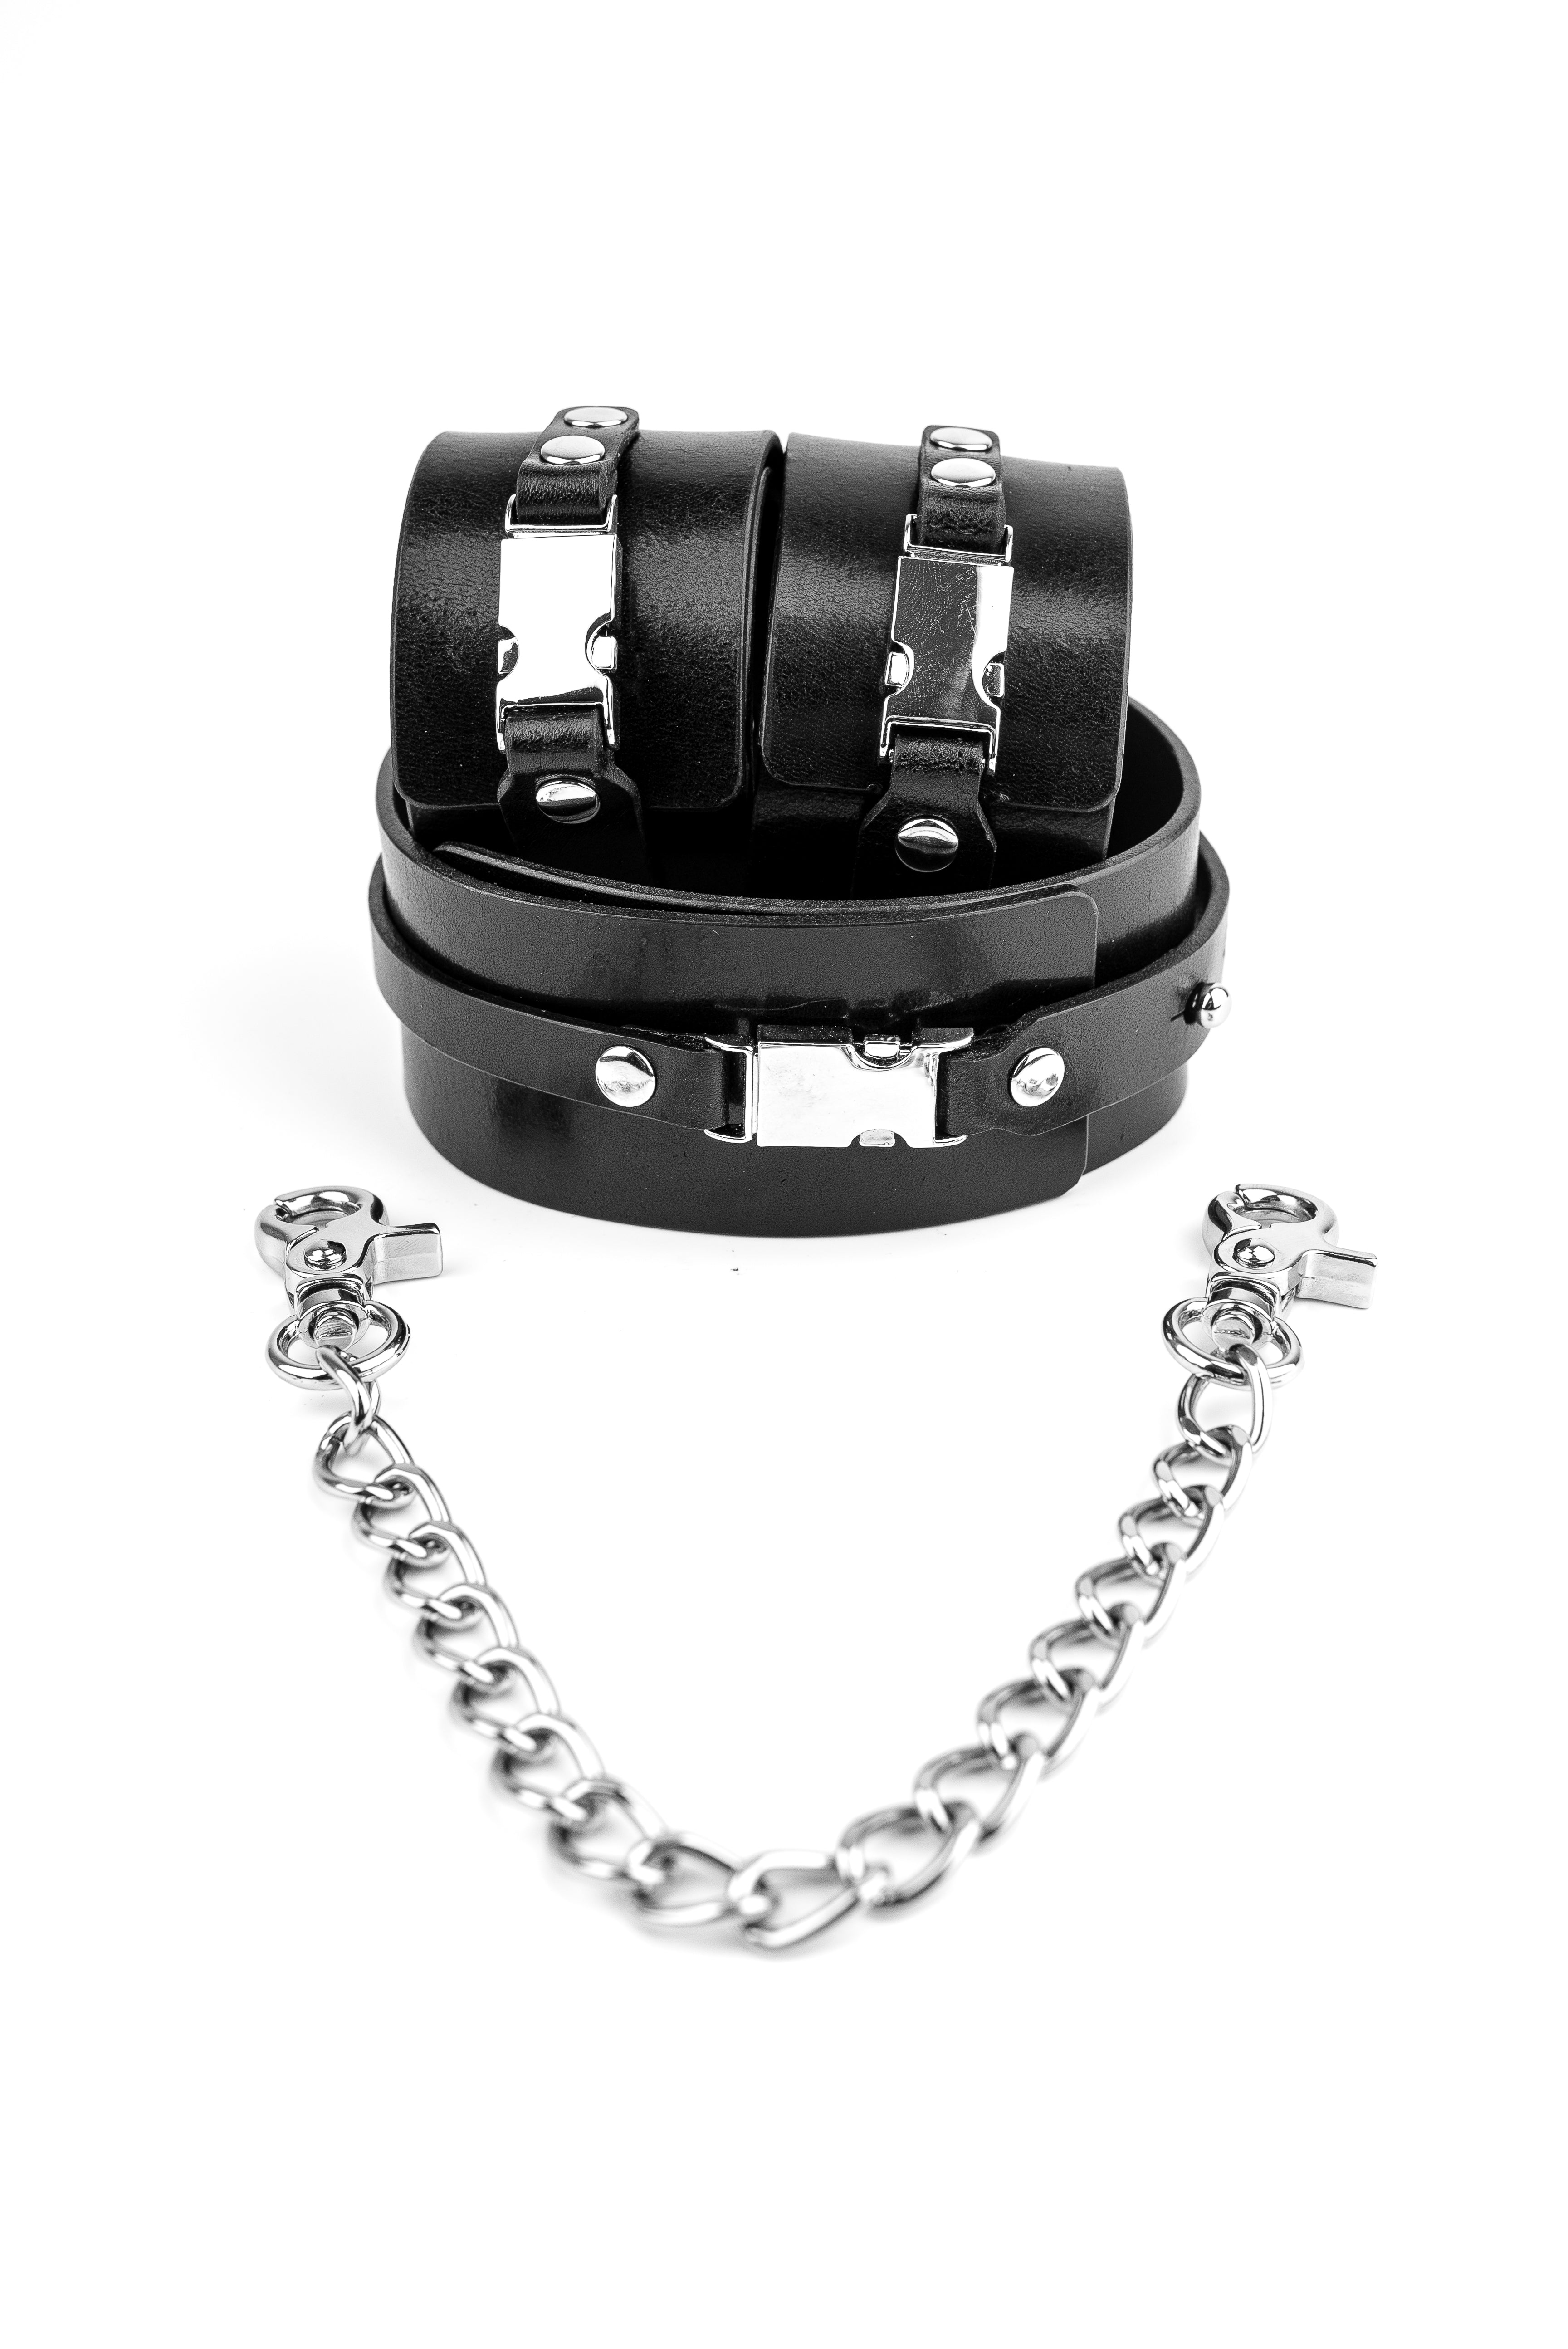 “Fast X me up” Cuffs and Collar Set with chain connector